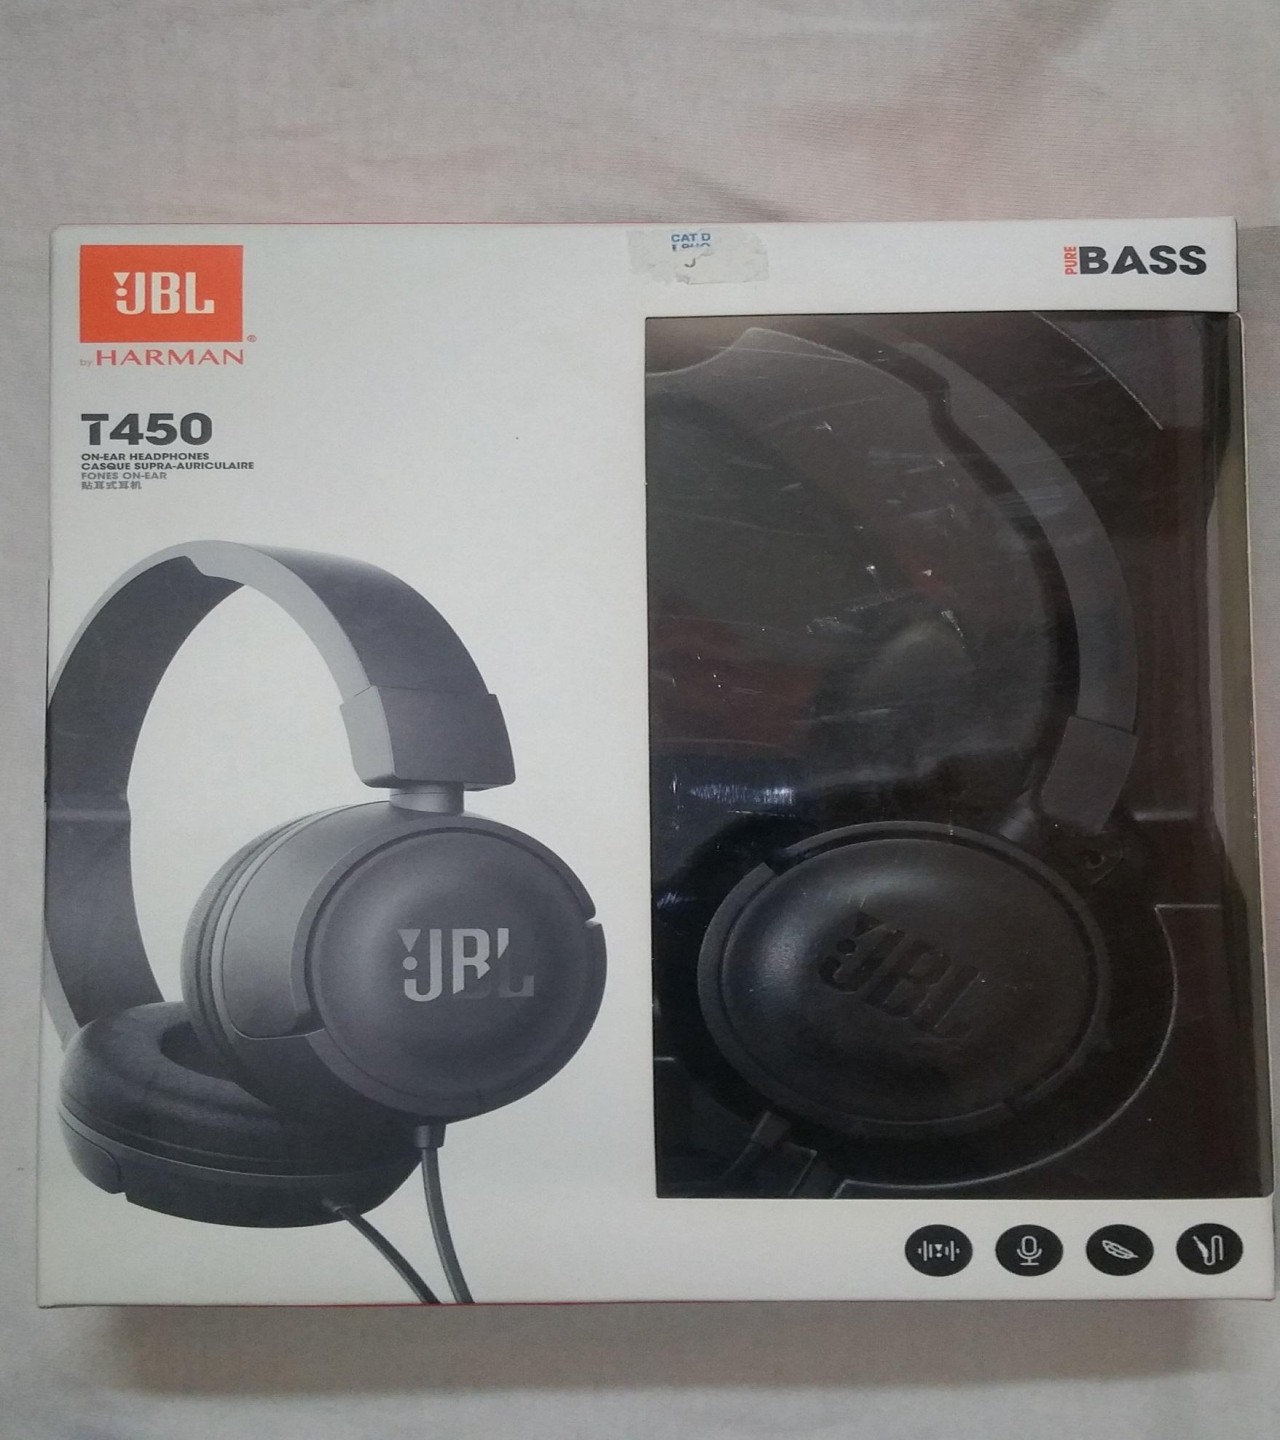 Gaming Headsets Bass Stereo Headphones with HP Wired JBL T450